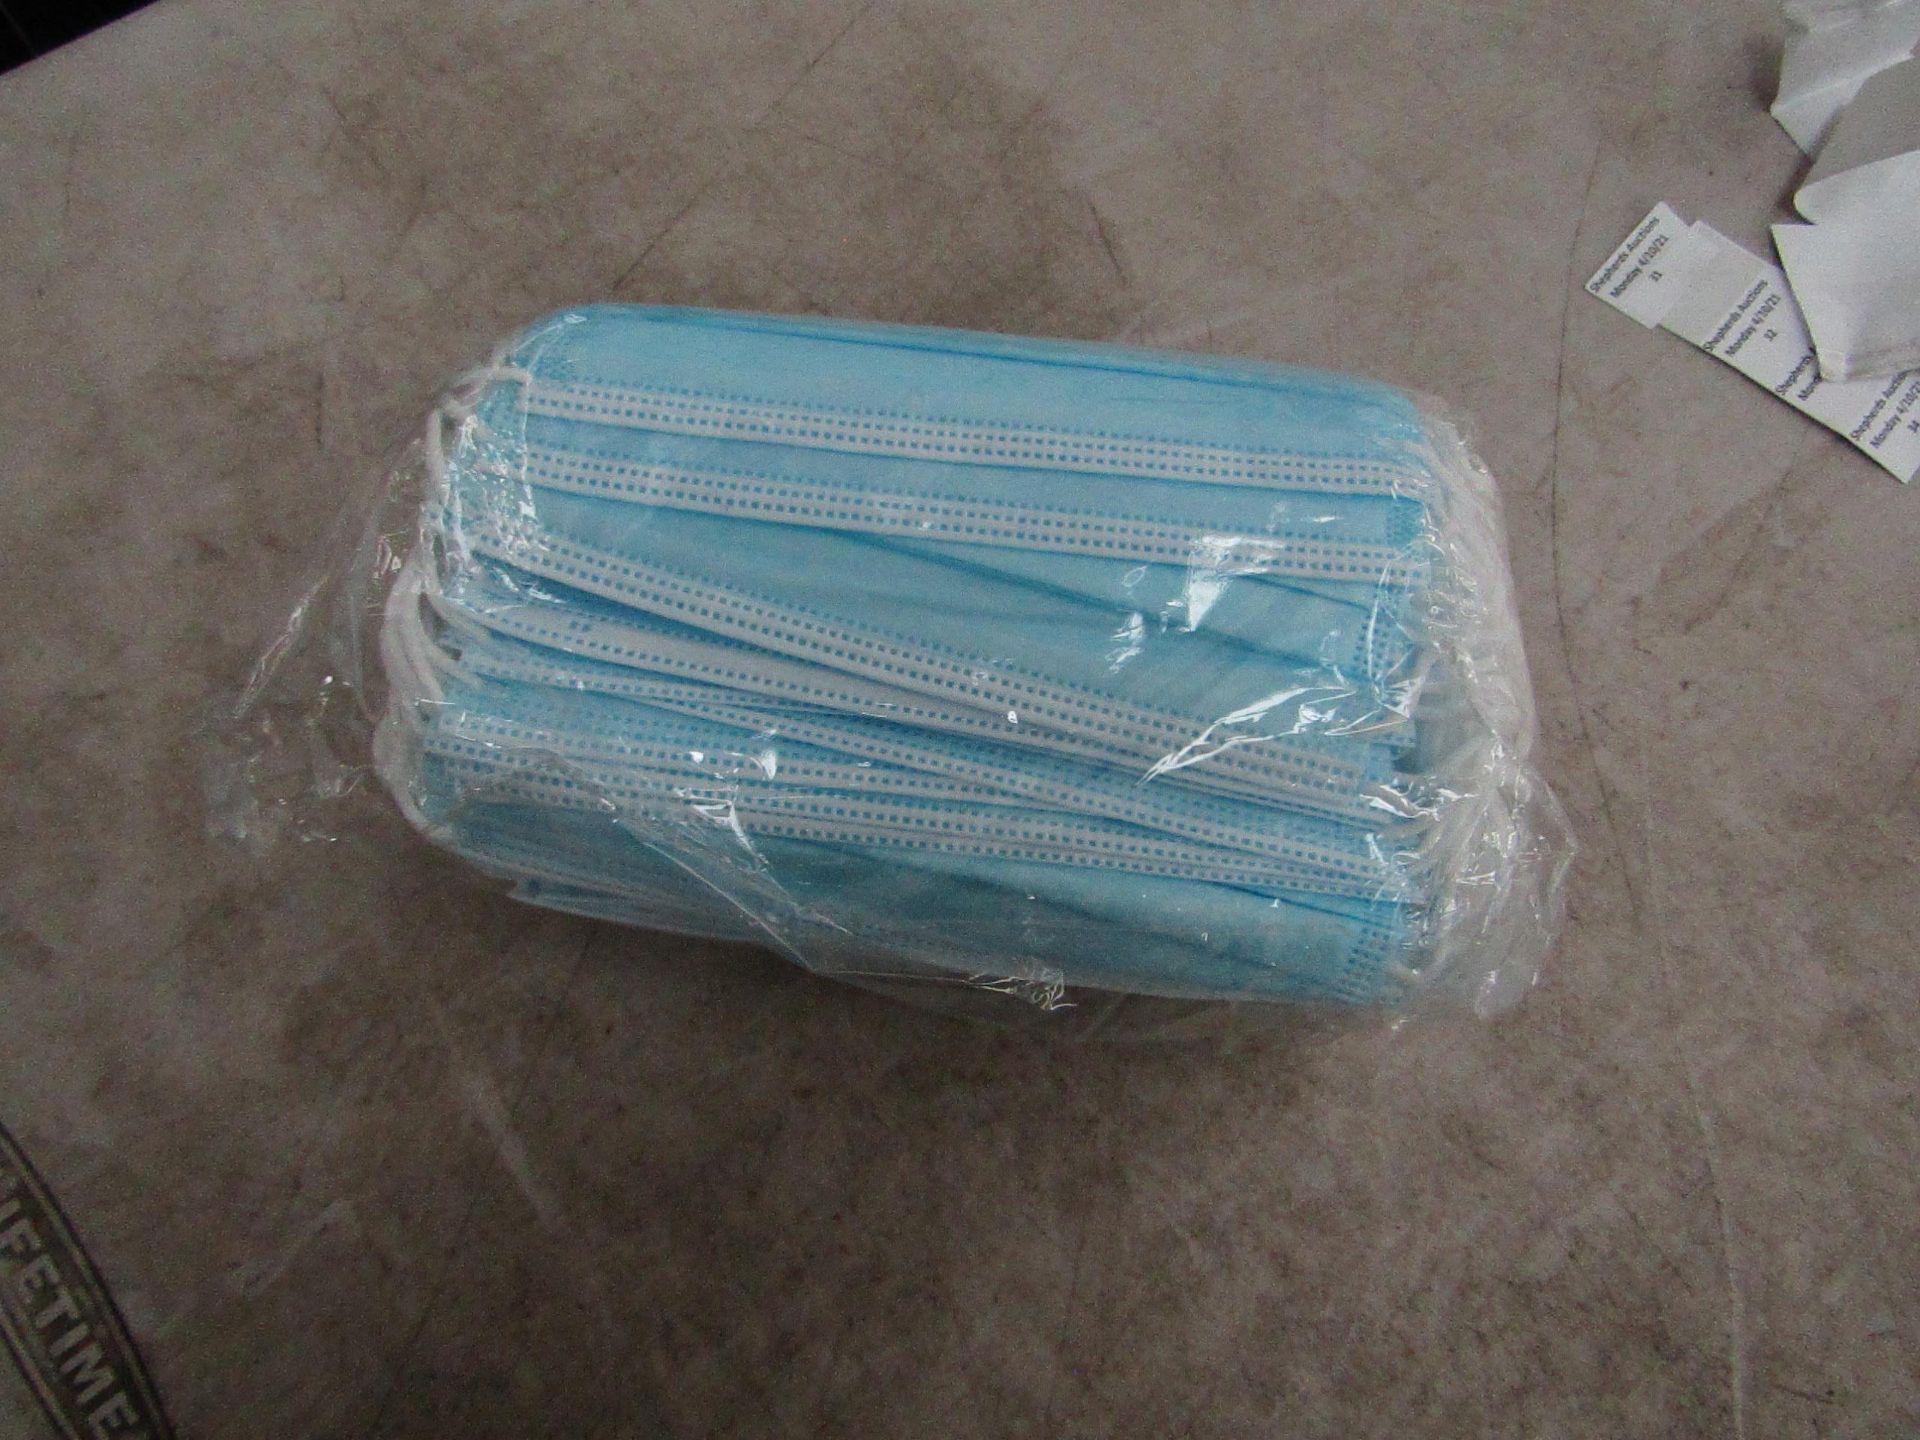 4x Pack of 50x disposable face masks - New & Packaged.